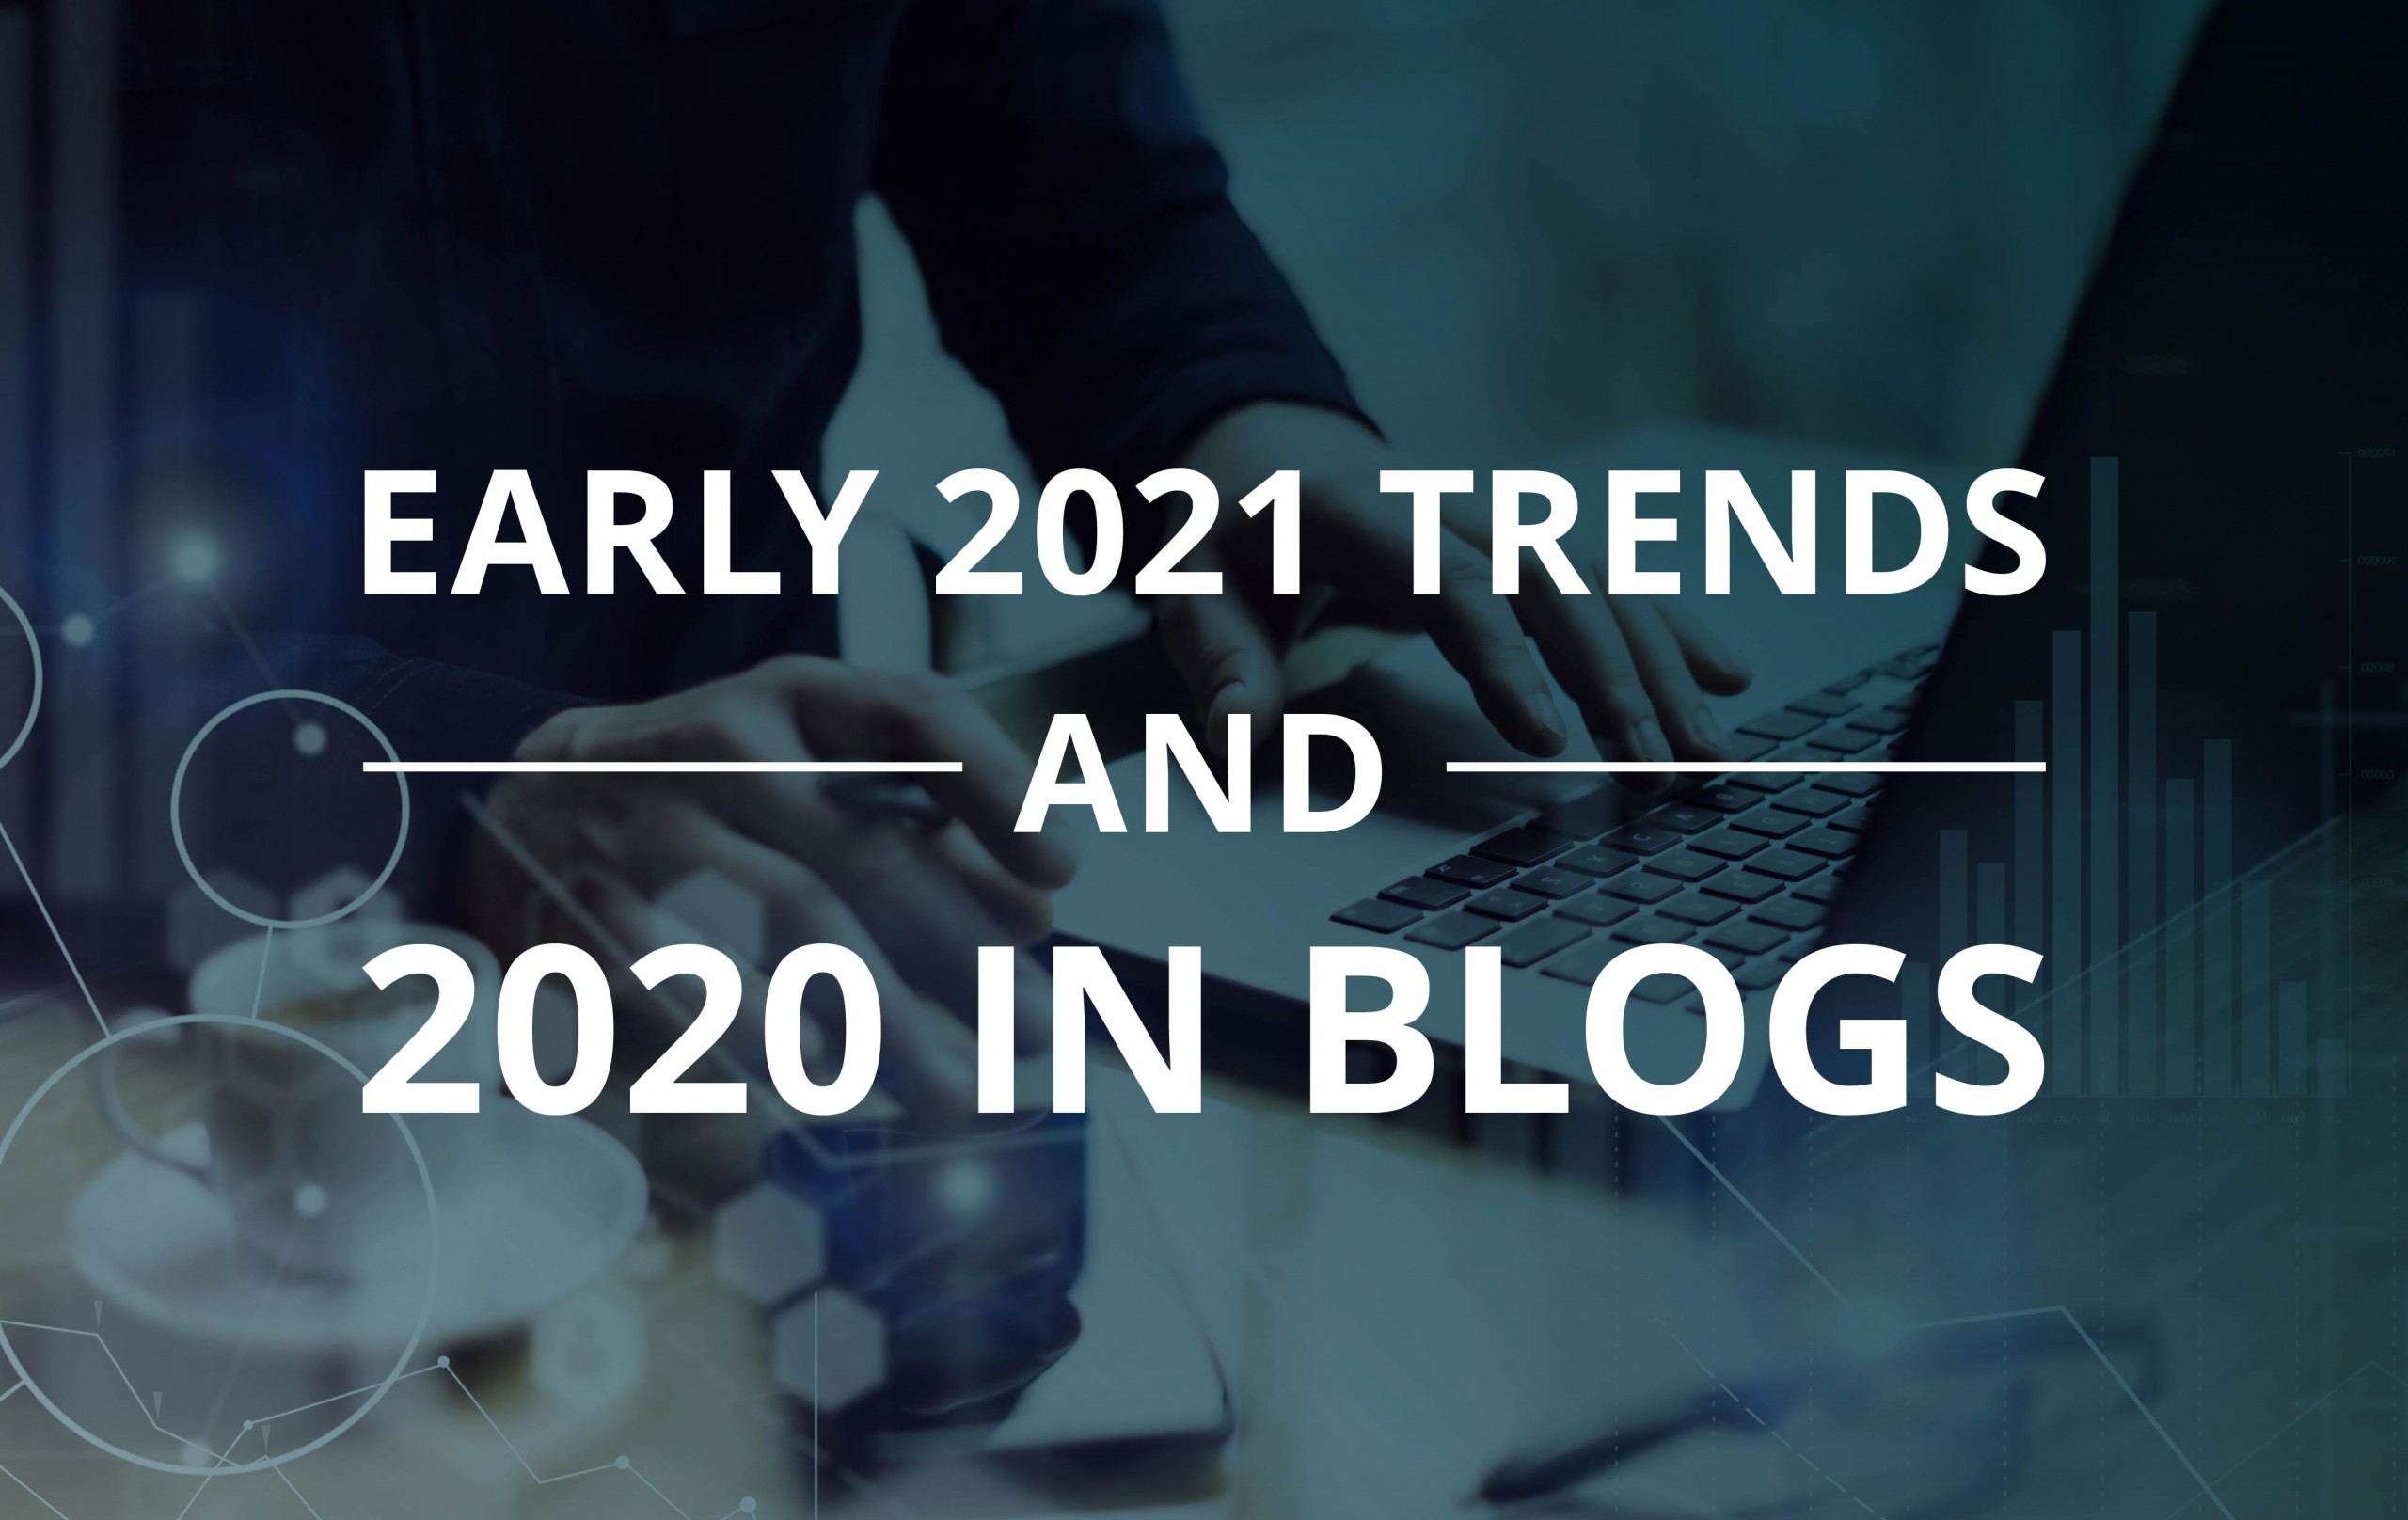 image for Early 2021 Trends and 2020 in Blogs